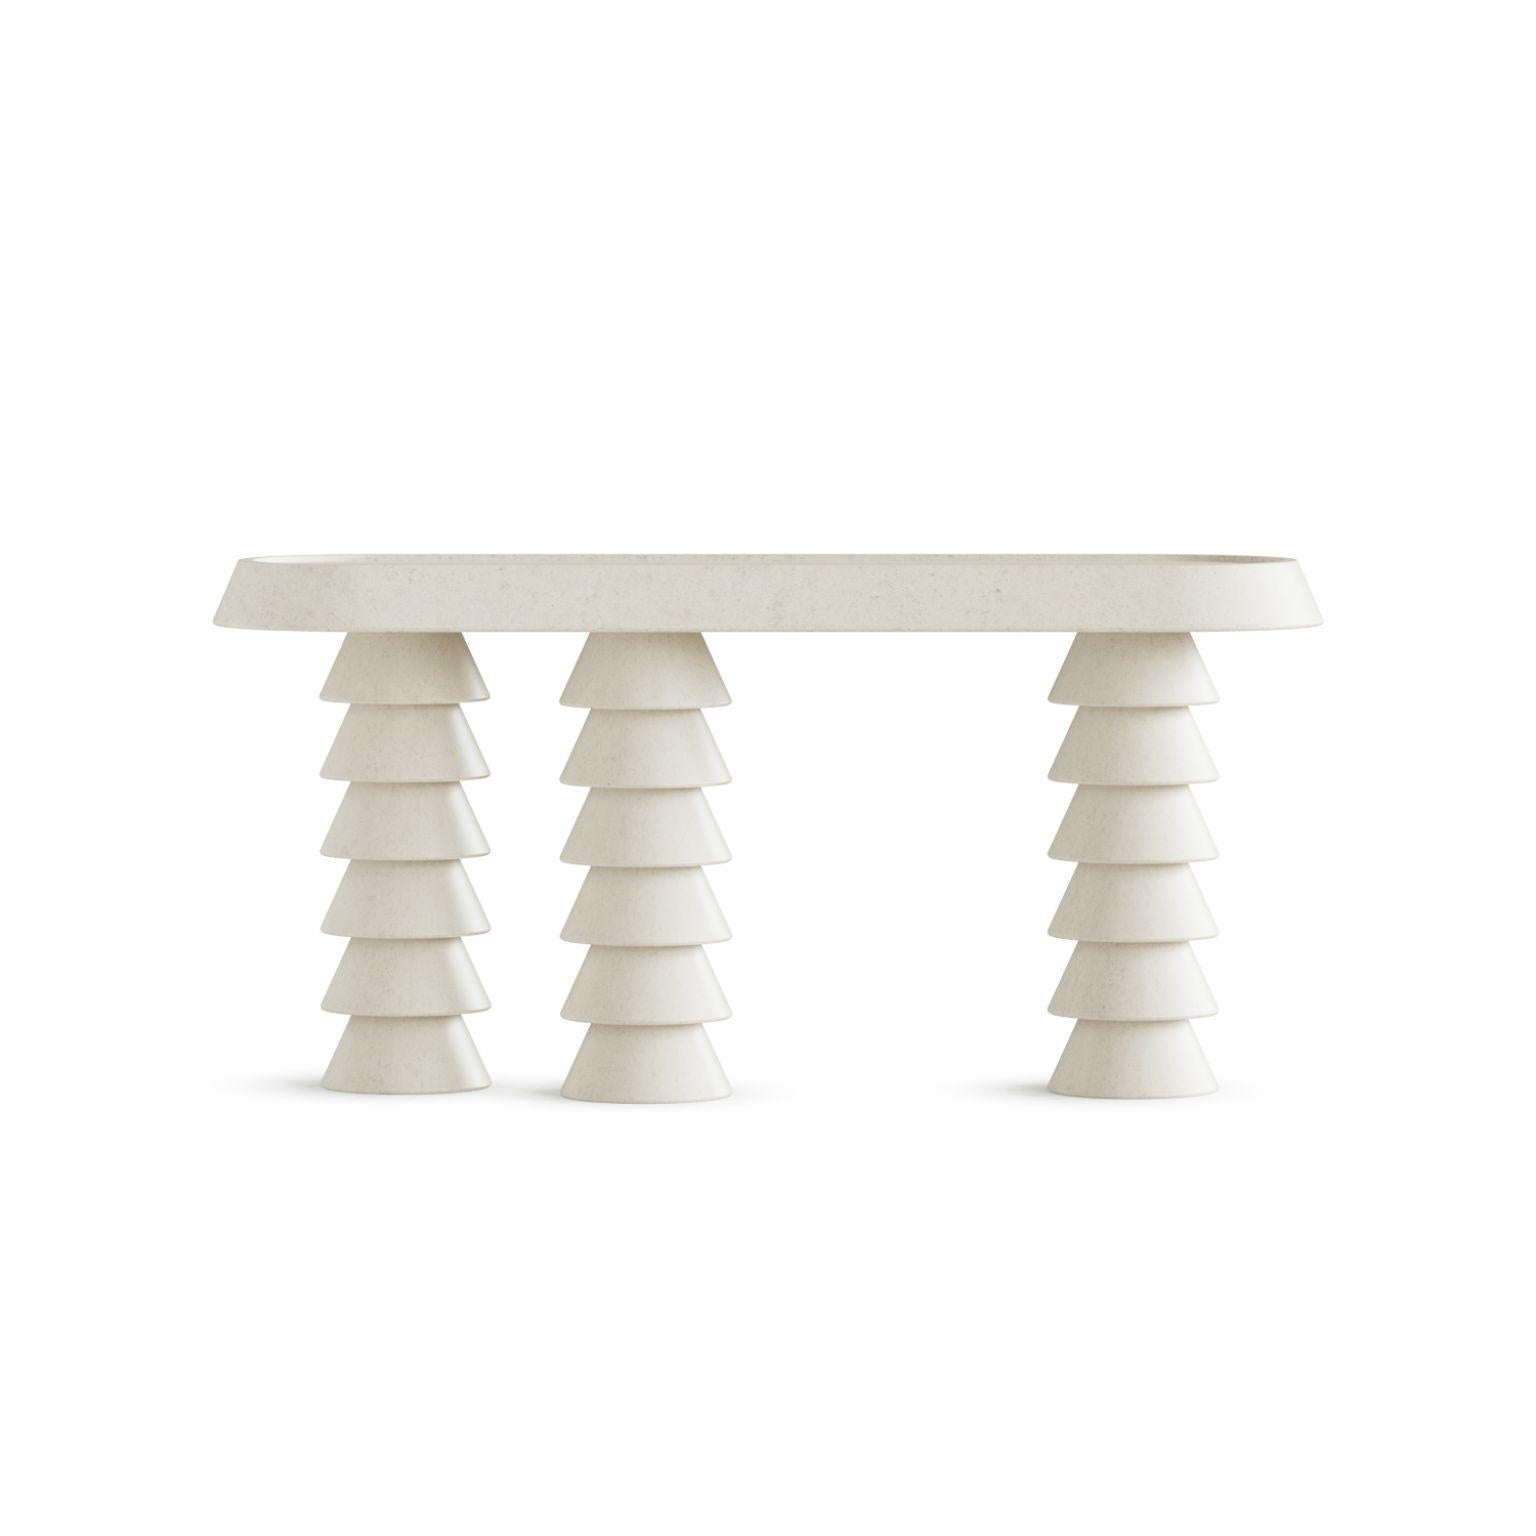 Trigono Creme Console Table by Studio Anansi
Dimensions: D46 x W153 x H74 cm
Materials: limestone
Custom stones available.. Please contact us.

Studio ANANSI, founded by Evan Jerry in 2018, represents a reection on modernity with a nod to the